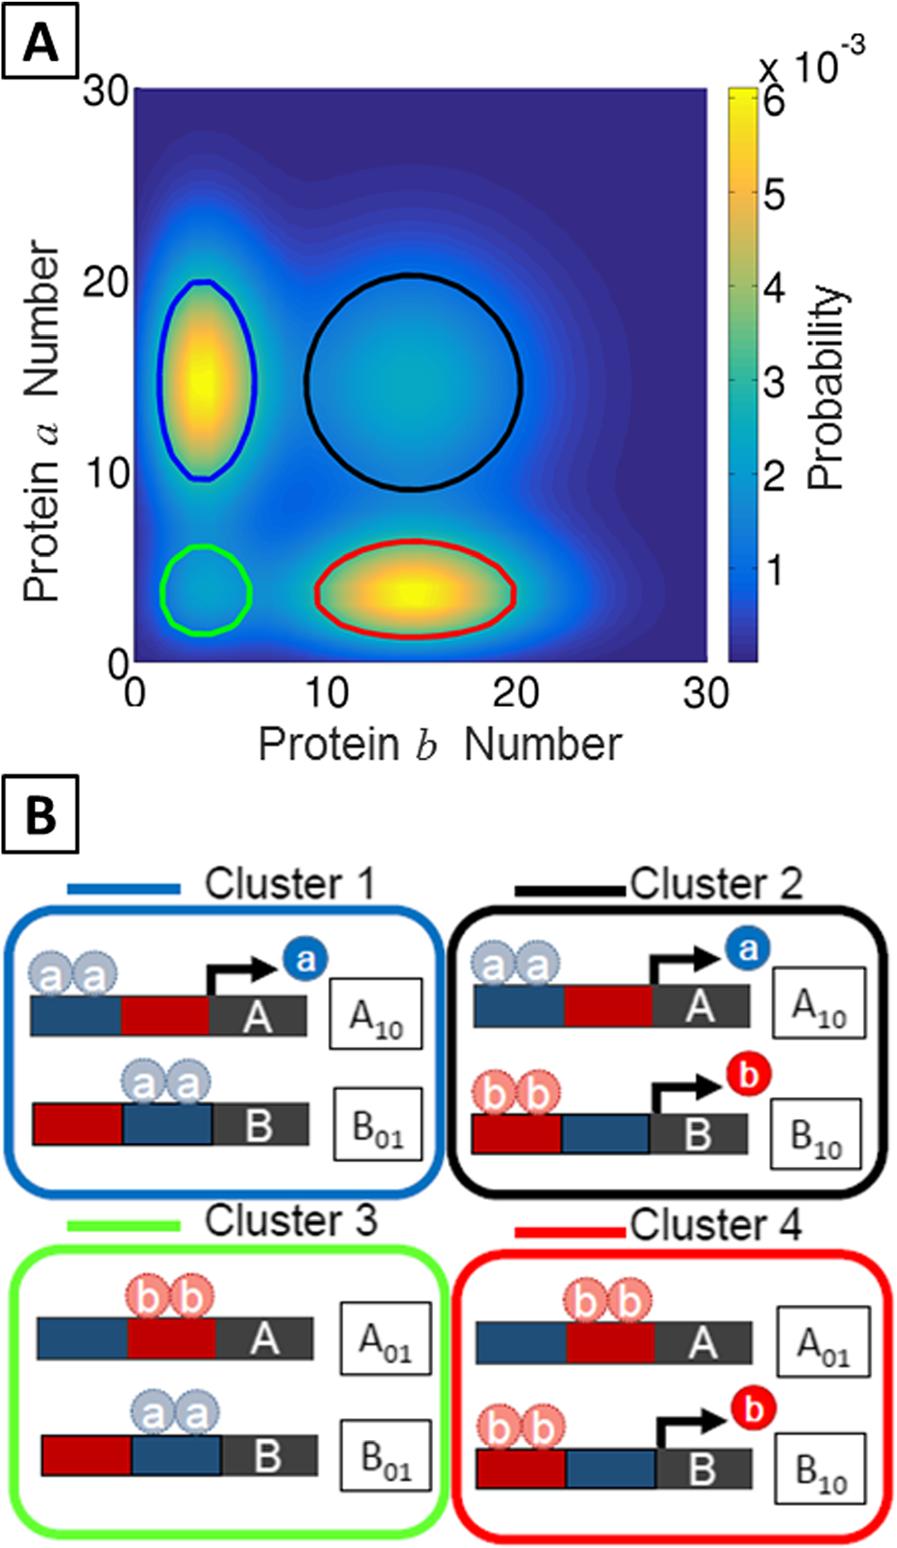 Chu et al. BMC Systems Biology (2017) 11:14 Page 7 of 17 Fig. 2 Four metastable clusters, or network macrostates, identified for the MISA network by the Markov State Model approach.